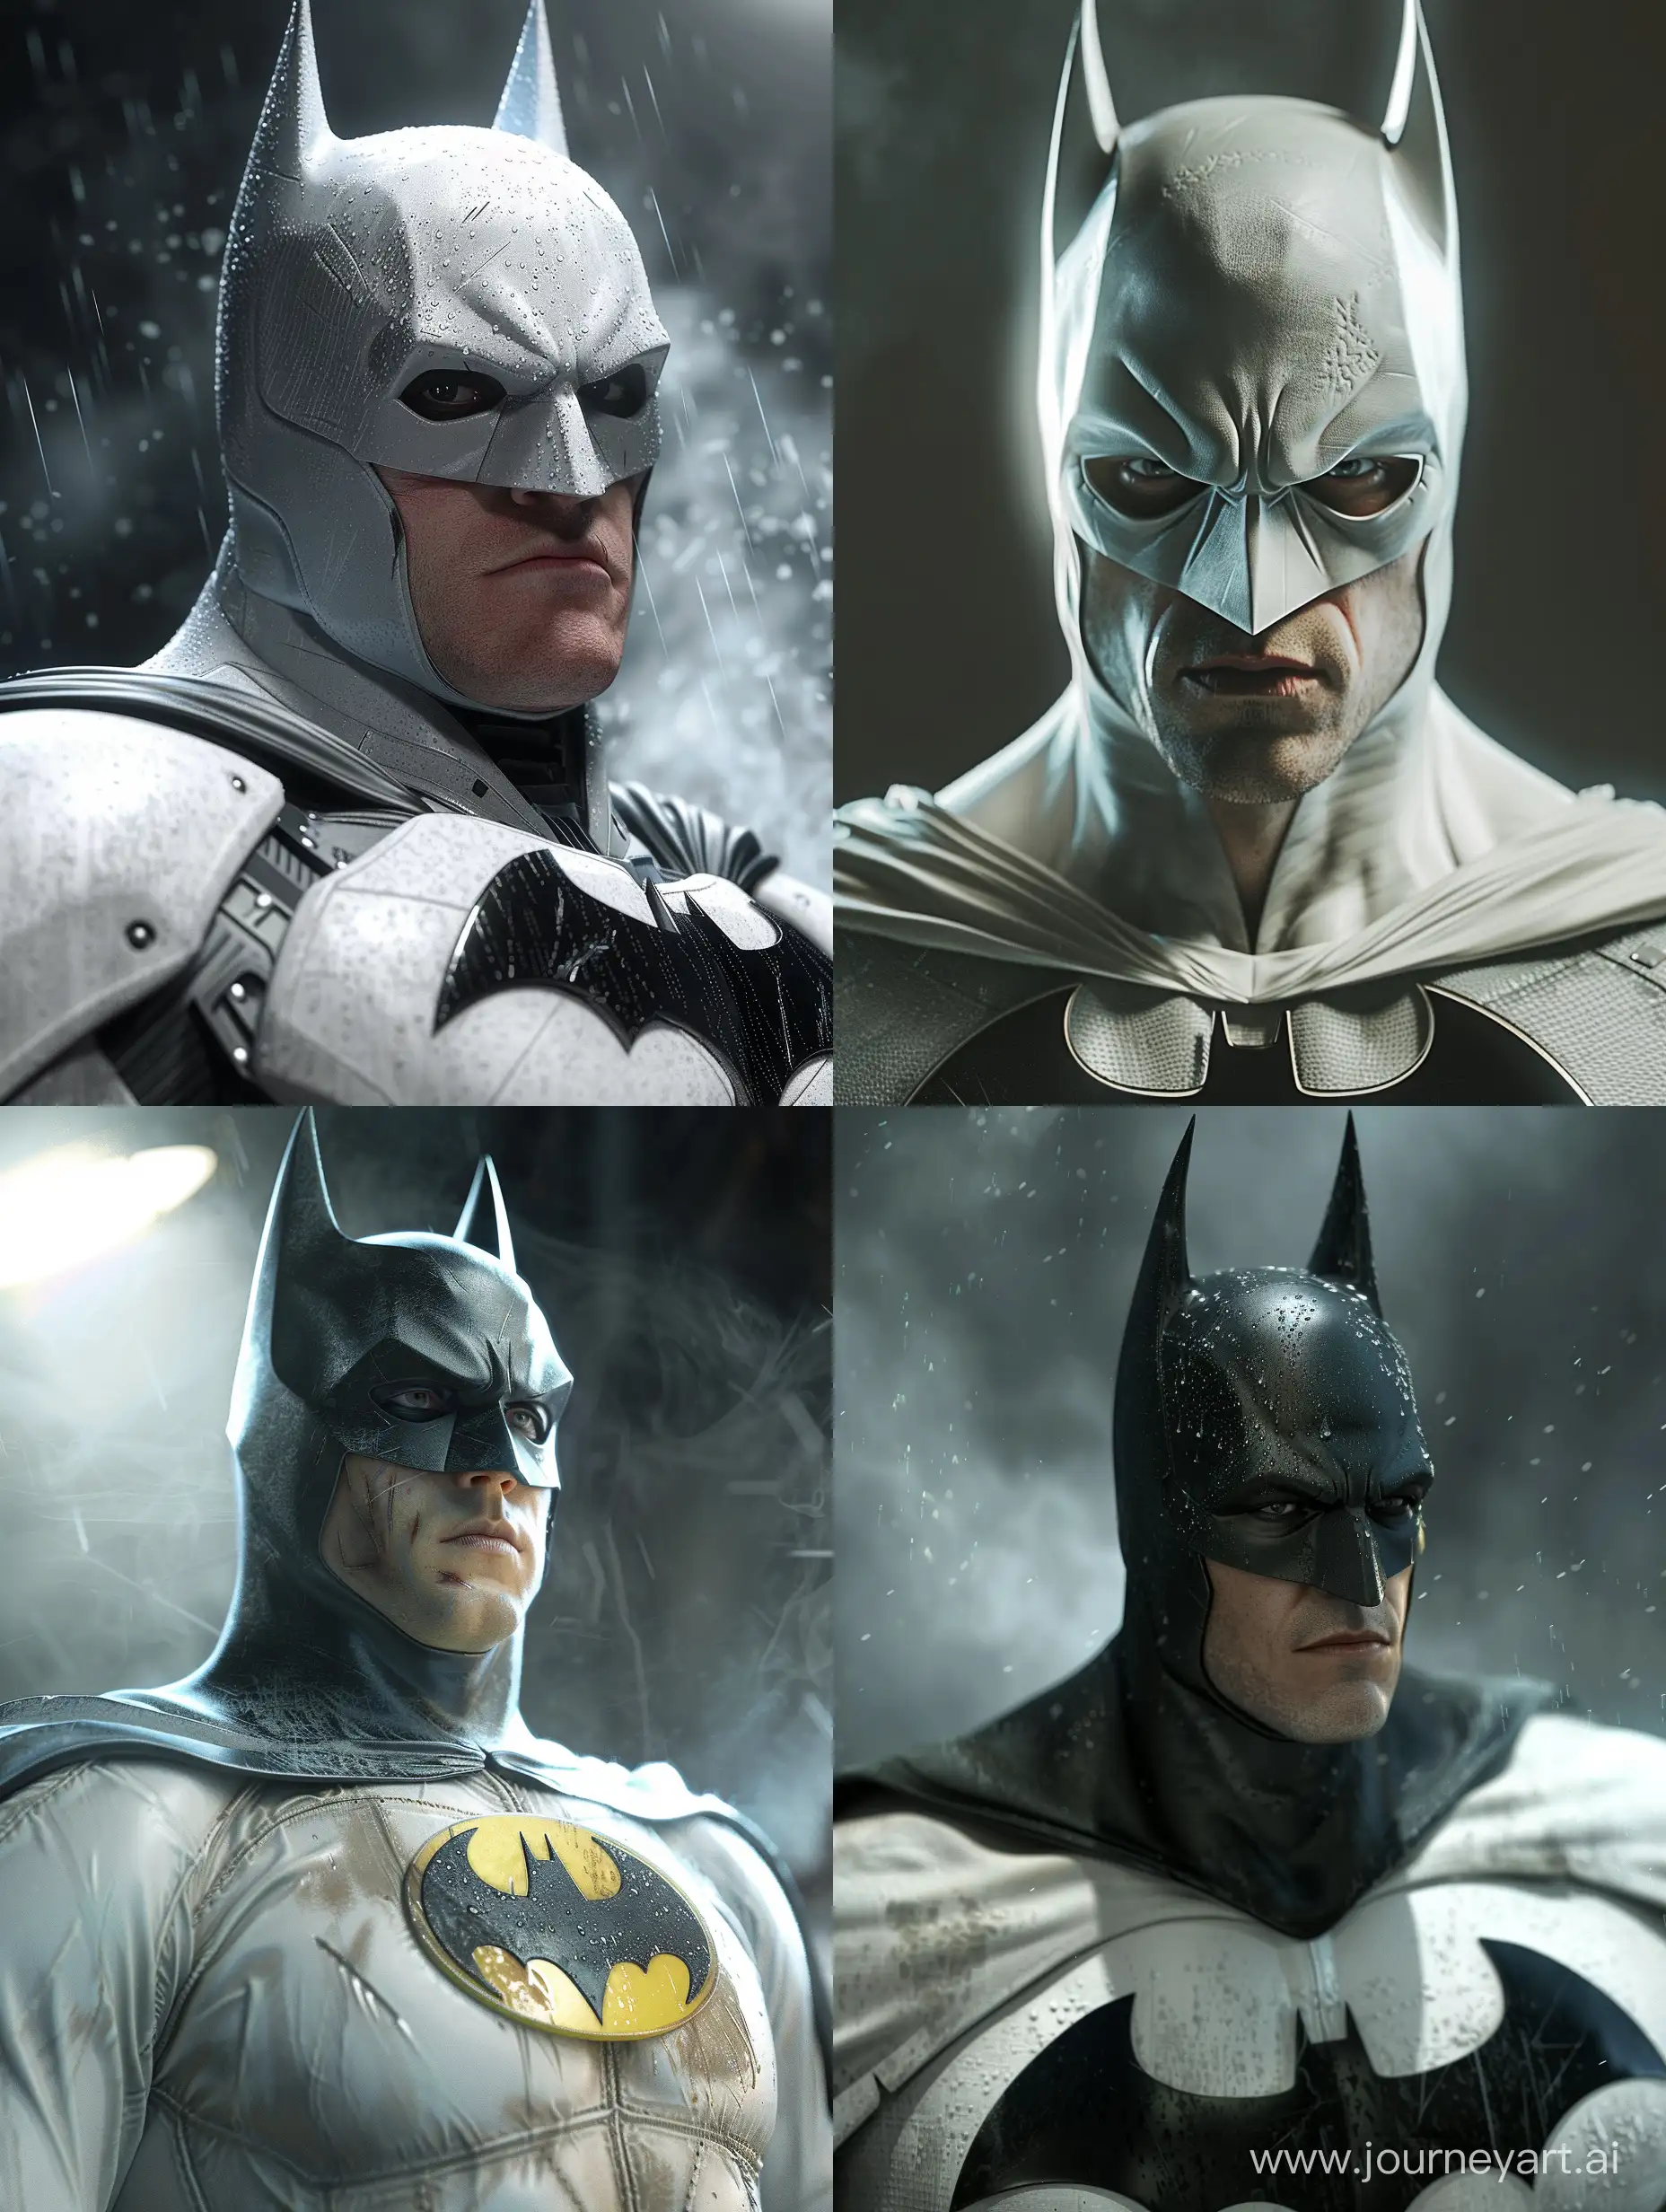 Christian Bale as Batman in White ultra-realistic, high resolution, with cinematic lighting 